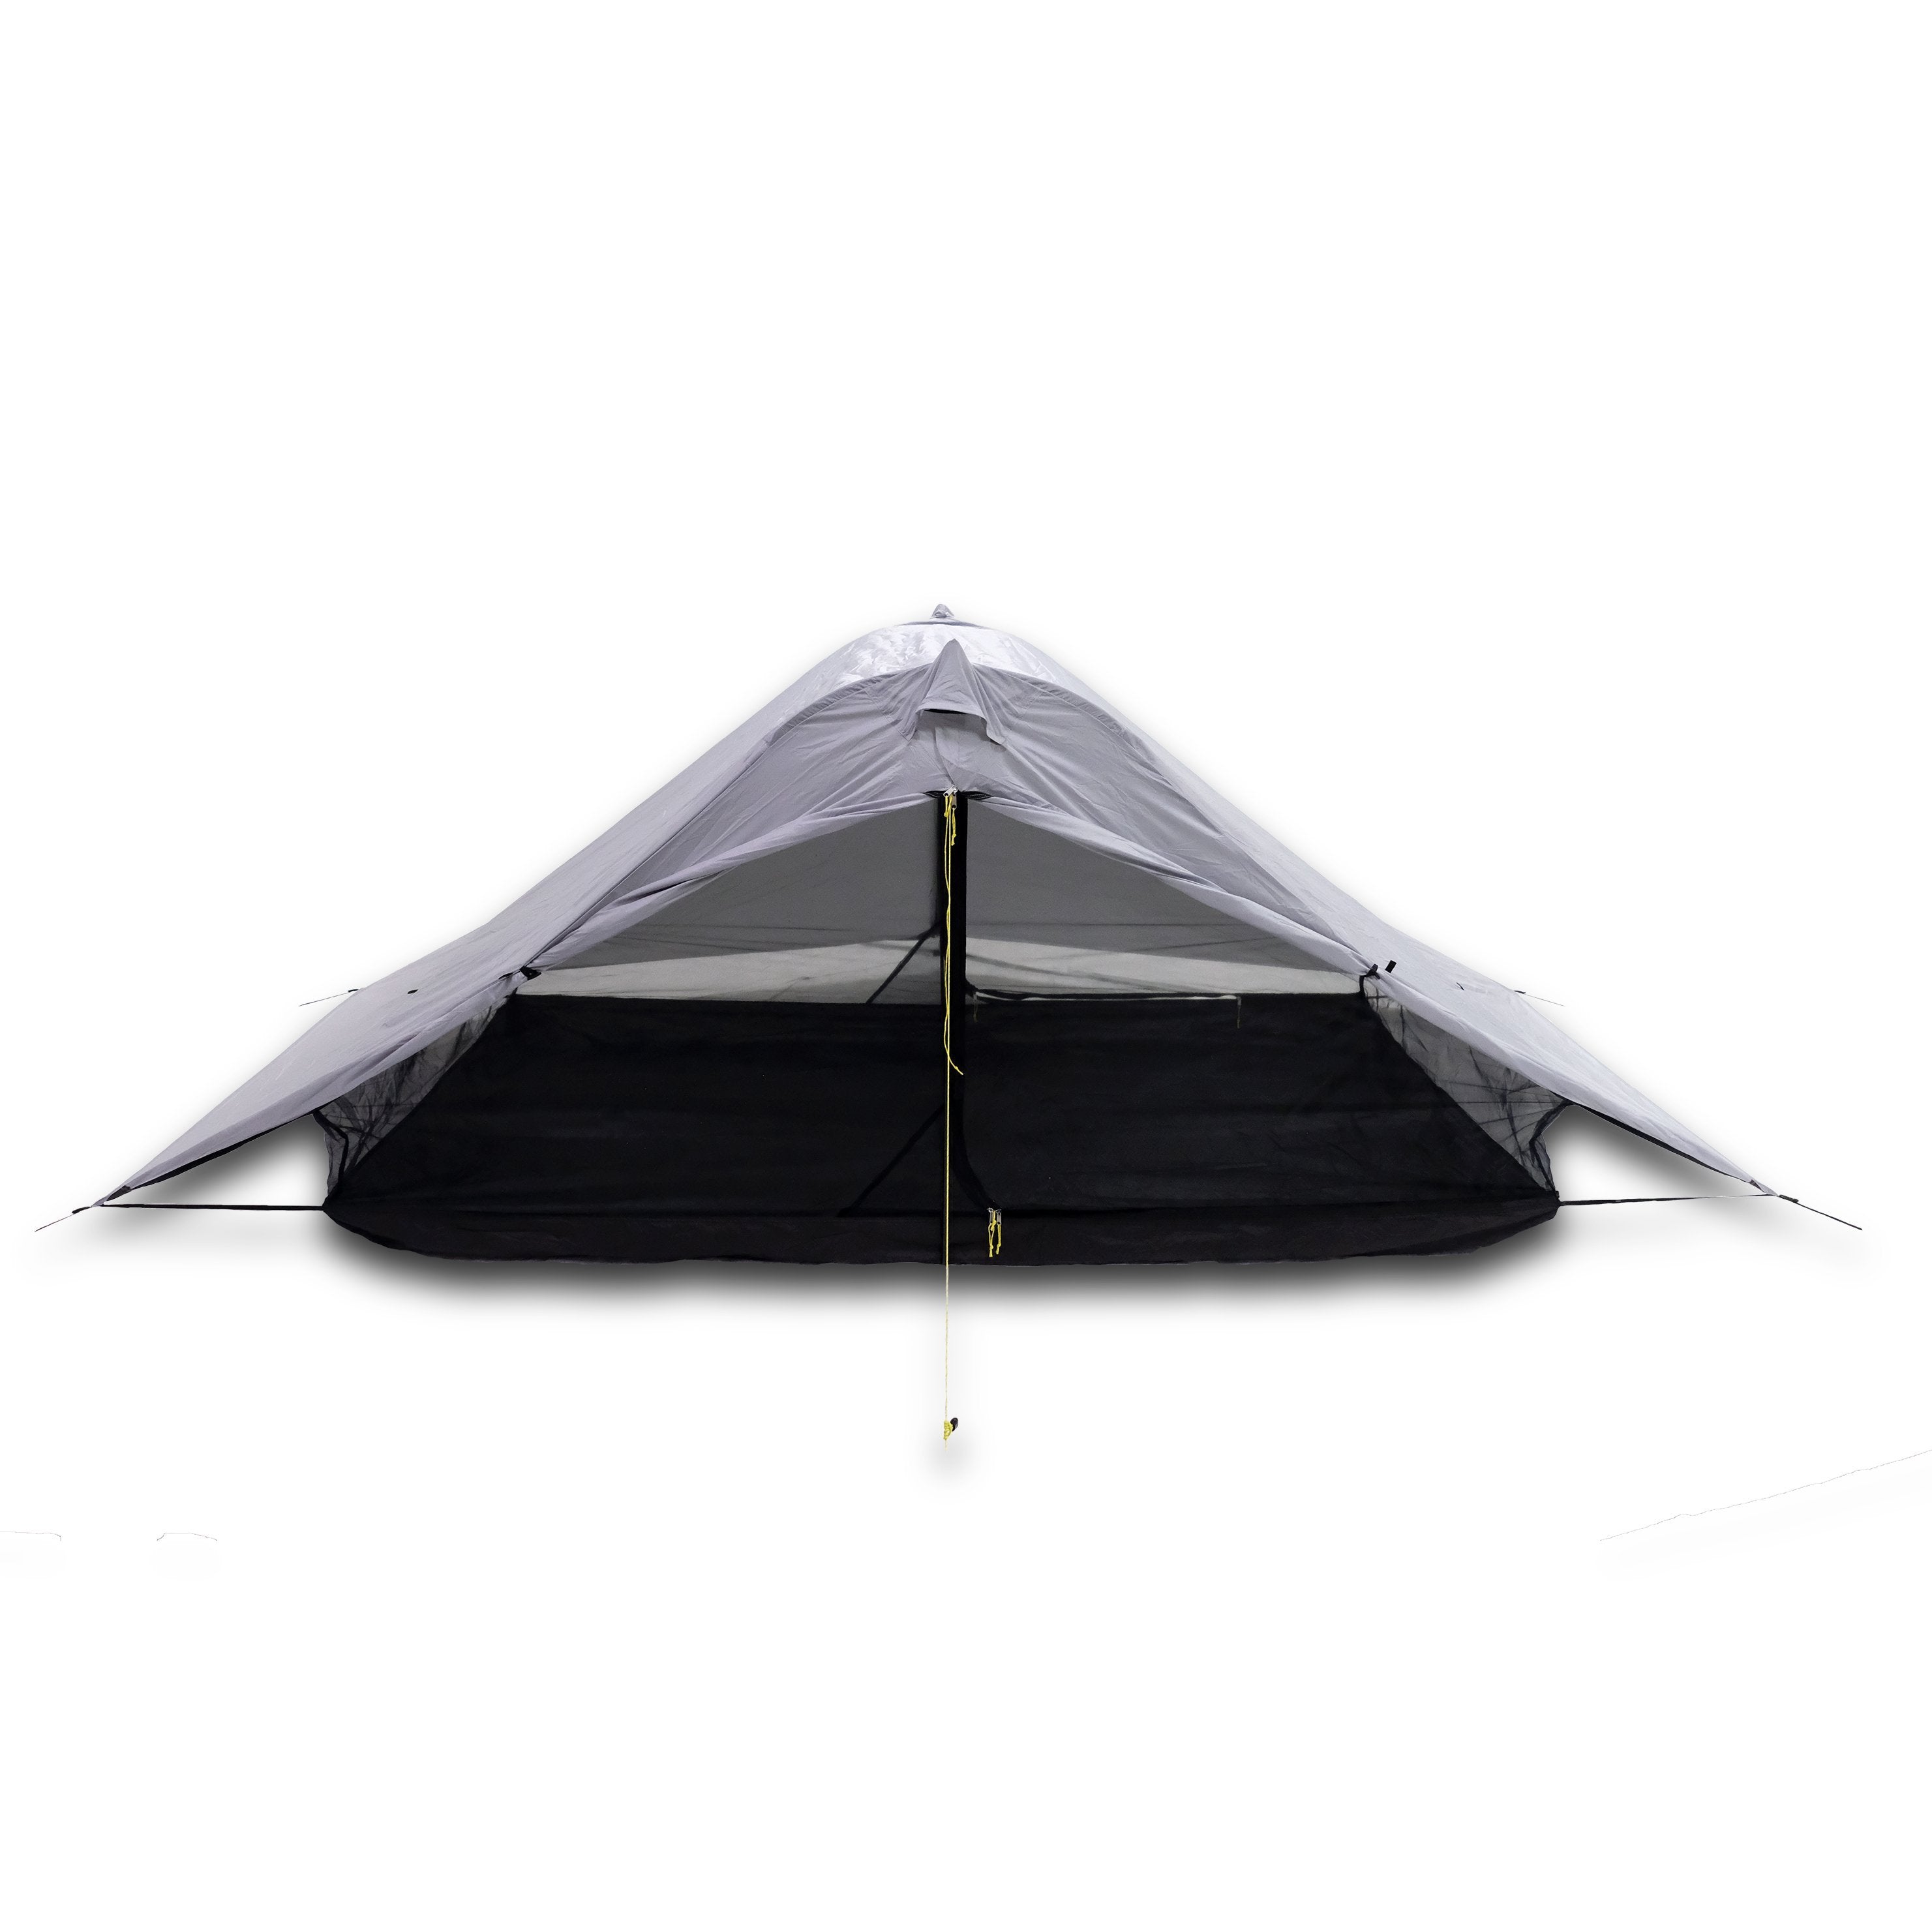 Lunar Duo Outfitter 2 Person Ultralight Tent with doors open